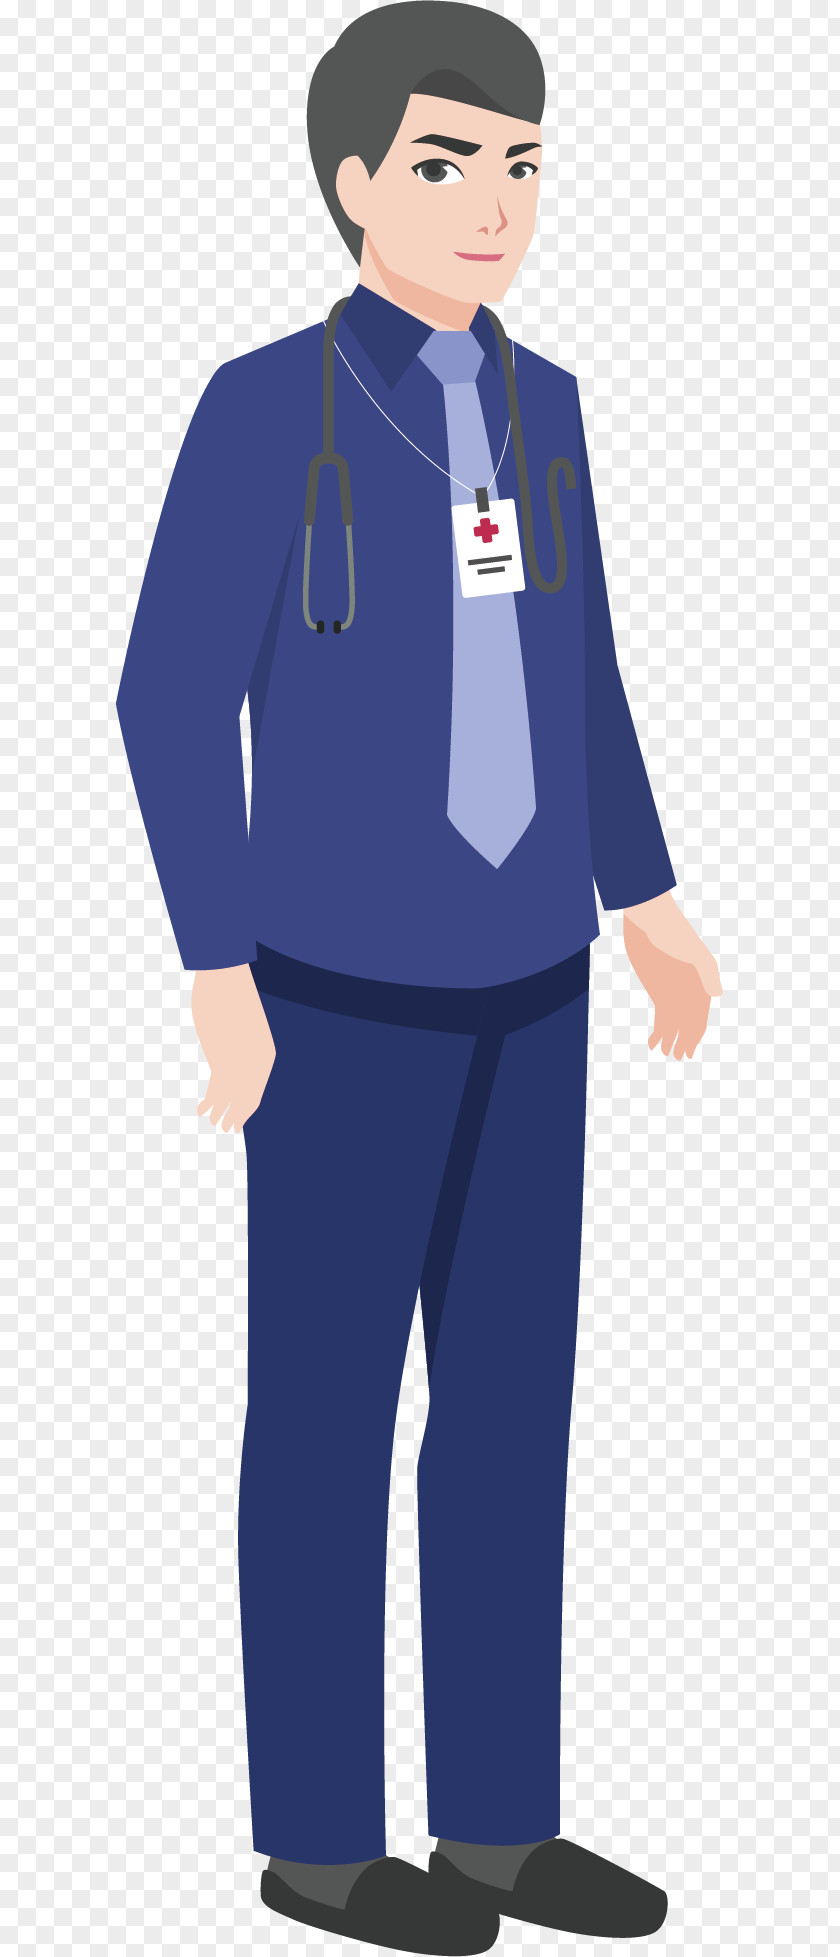 Say Hello To BLACK JACK Physician Cartoon Illustration PNG